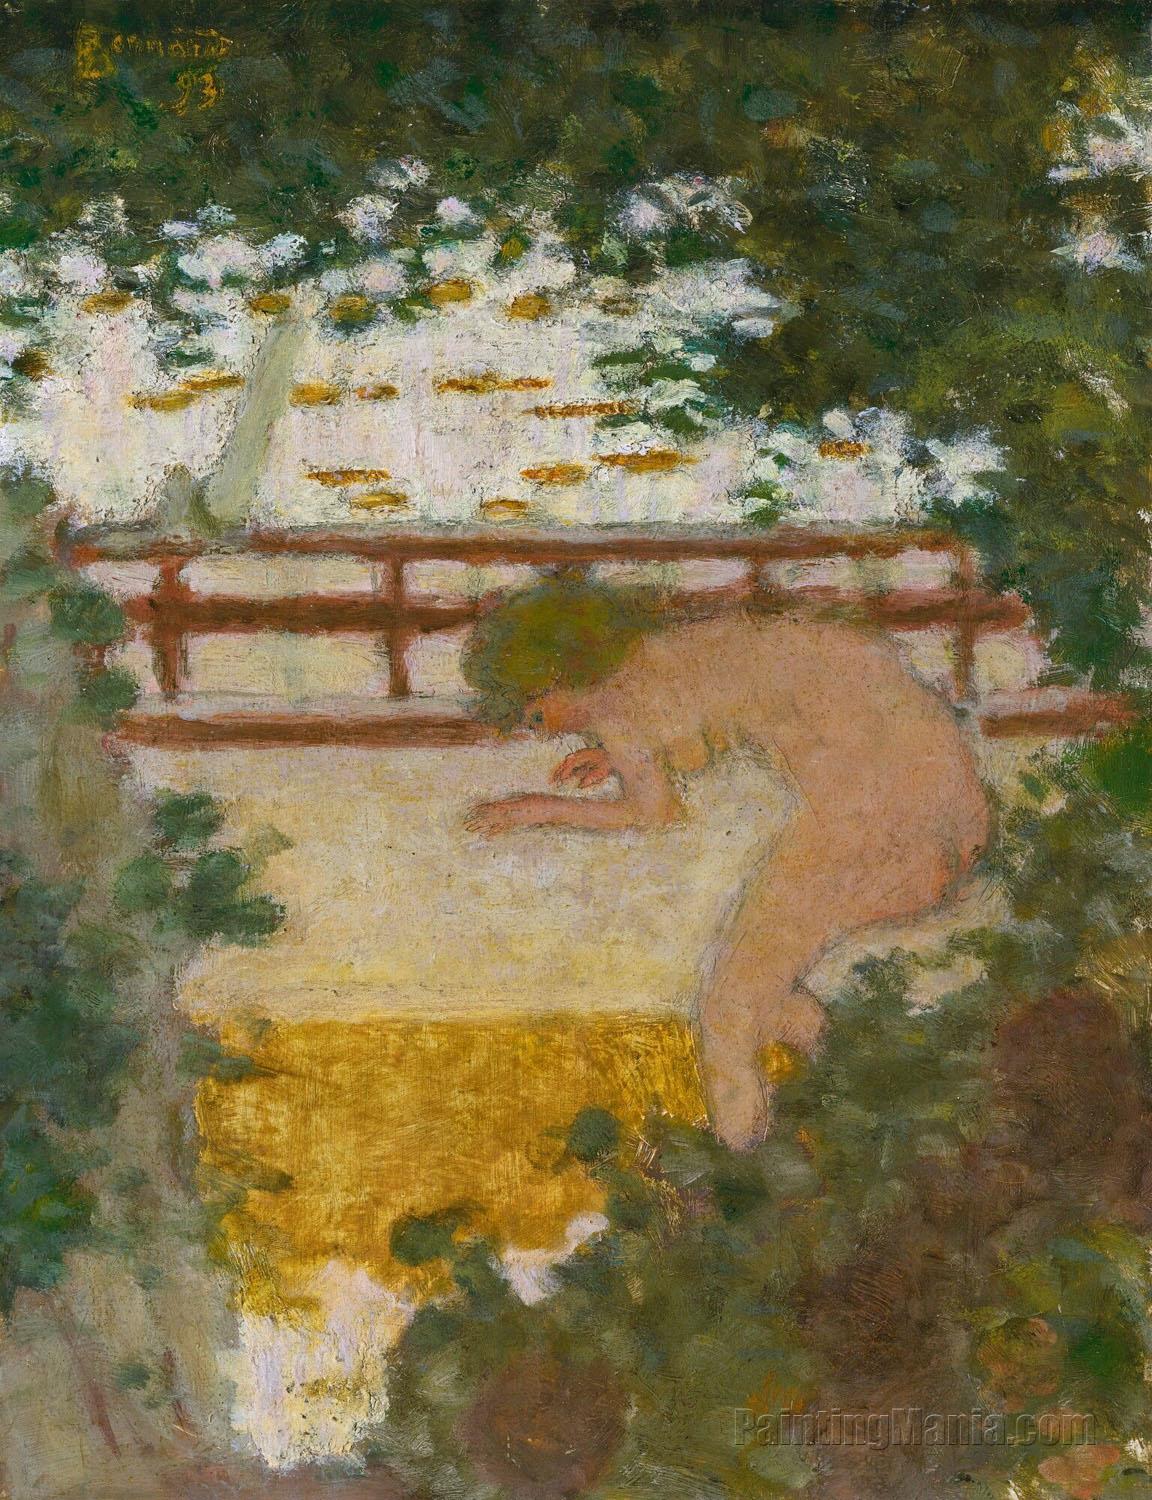 The Bathing near the Boat